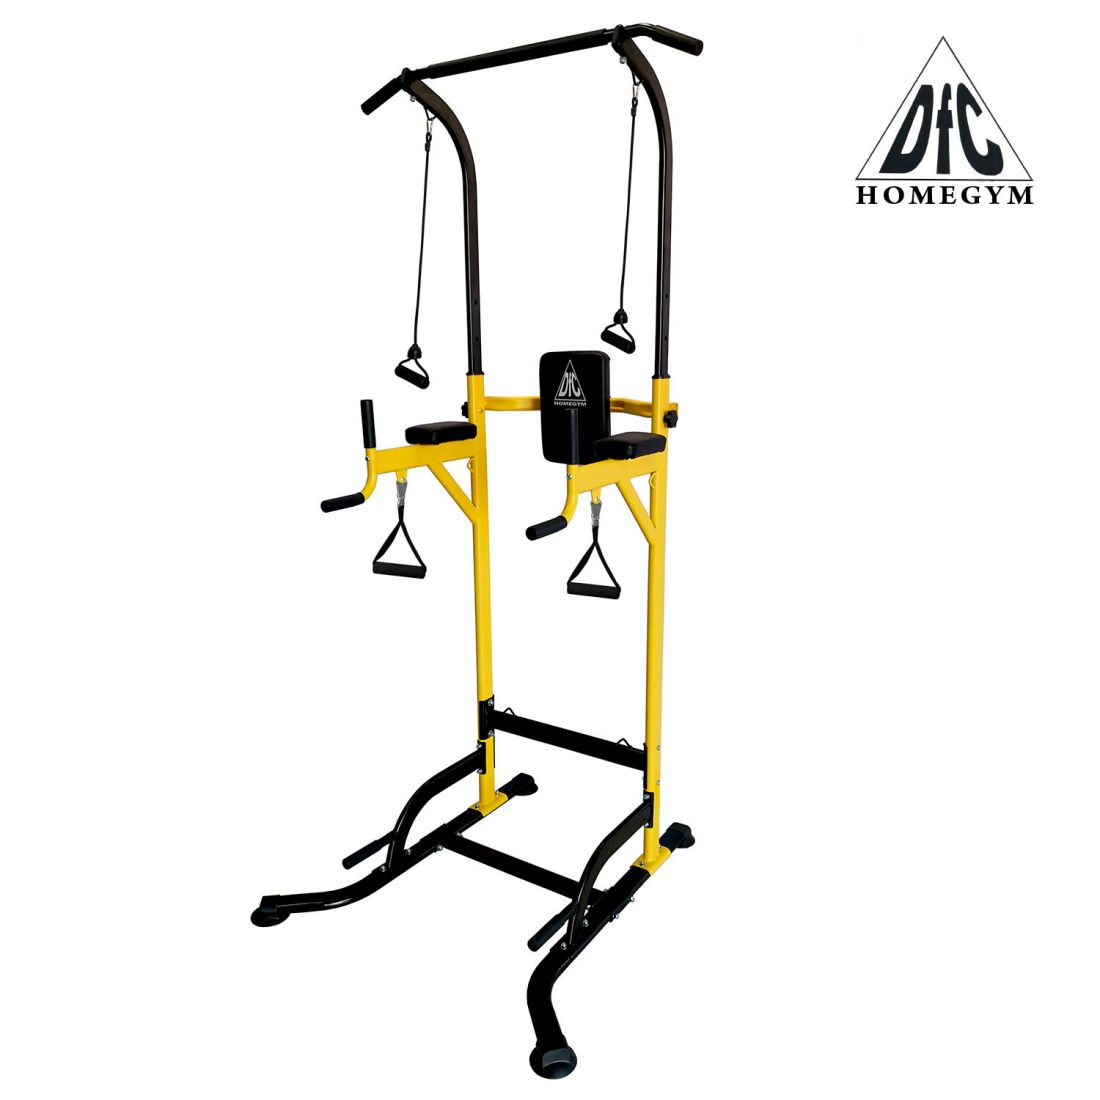 DFC Homegym G008Y